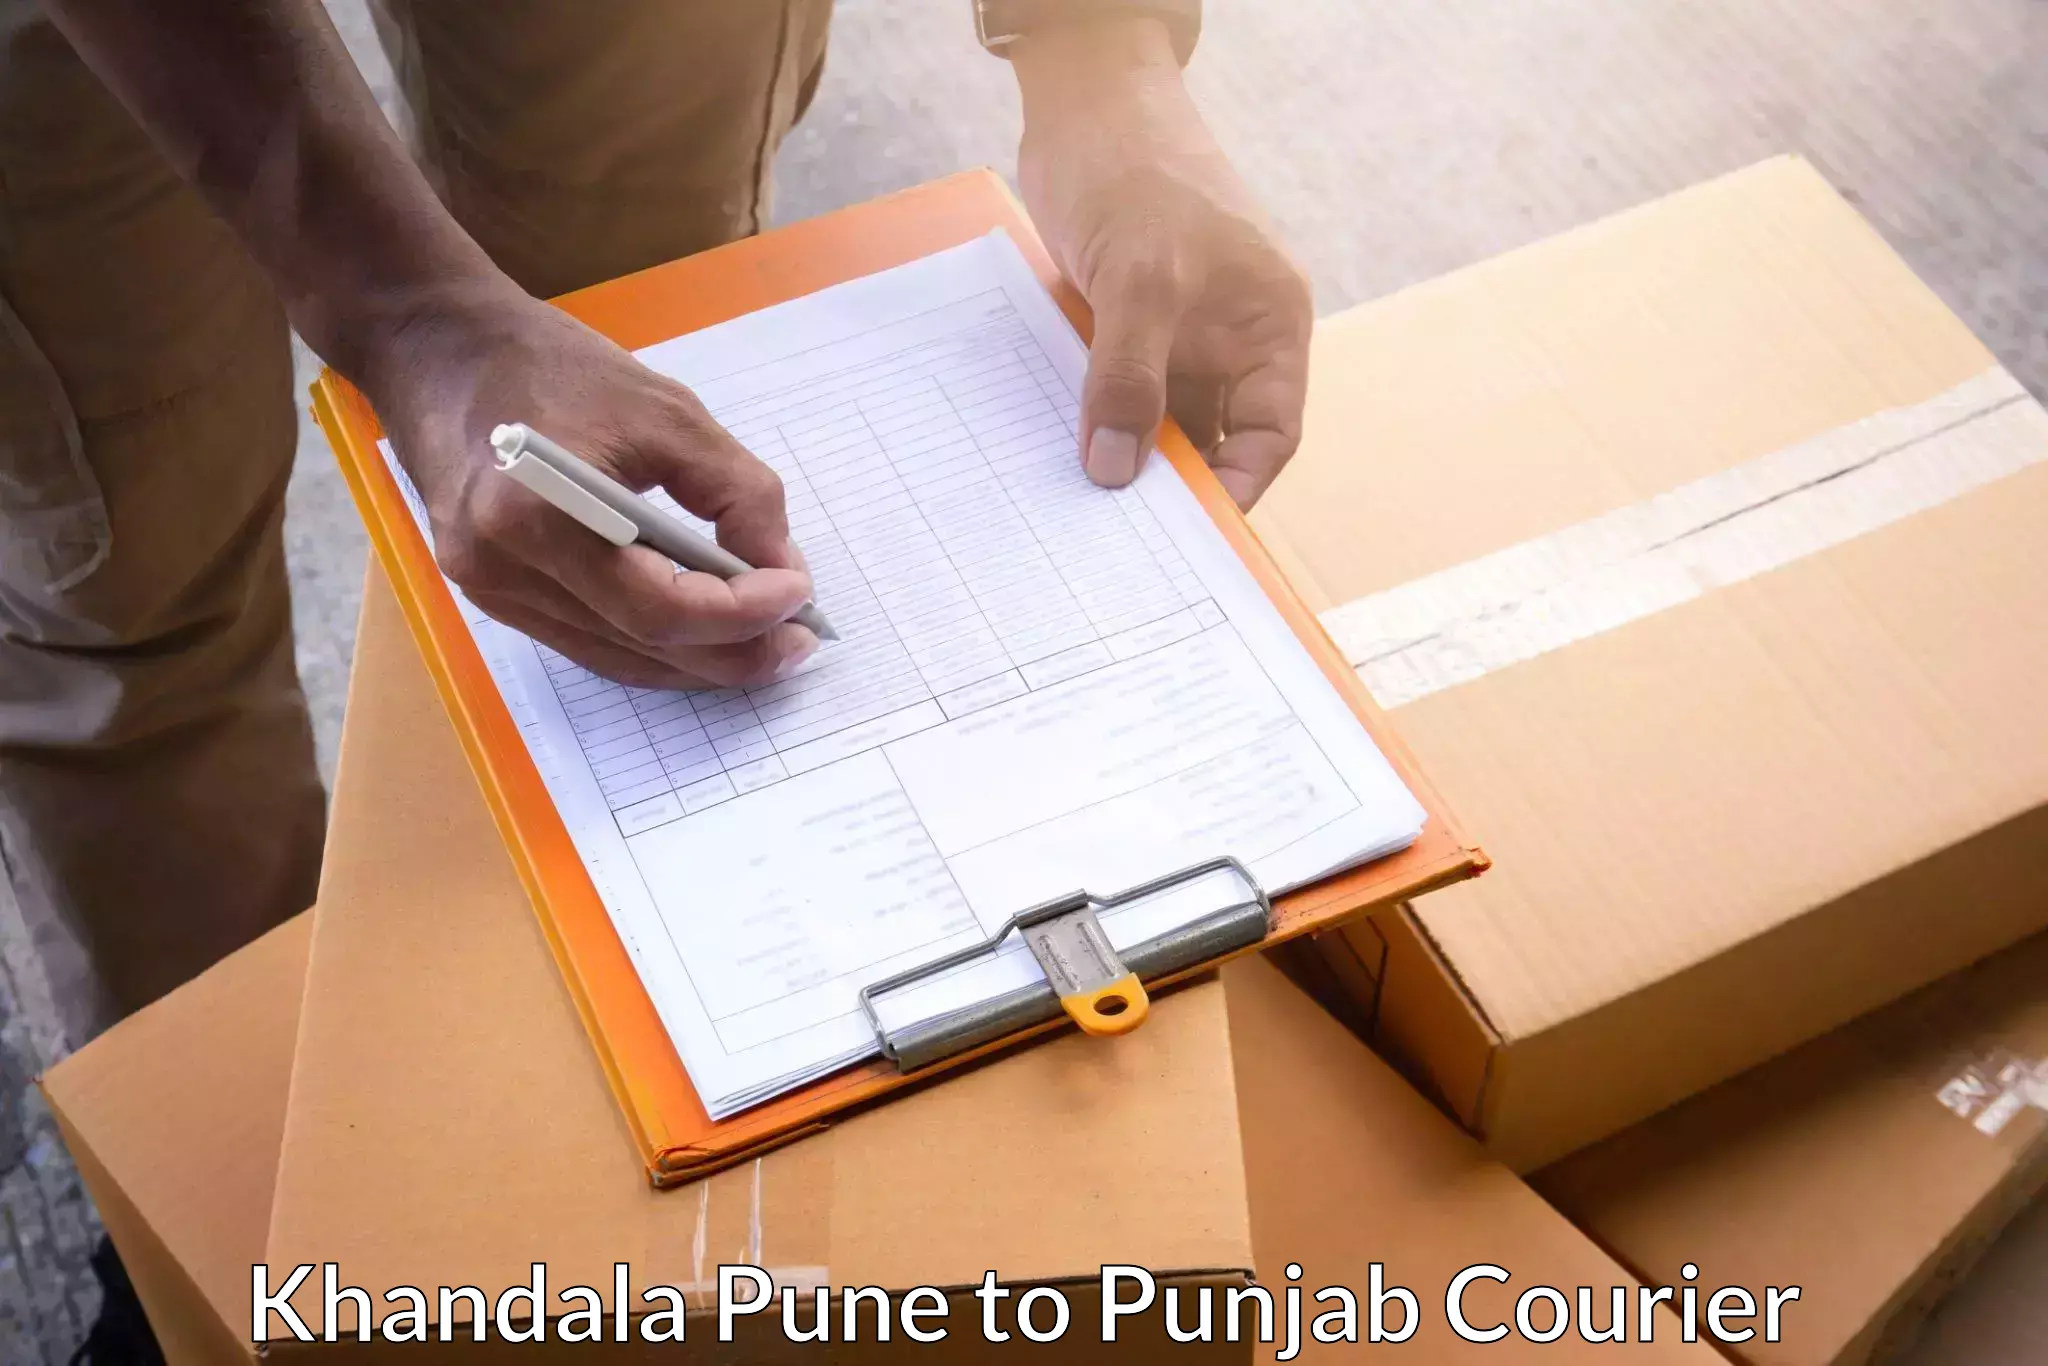 Parcel service for businesses in Khandala Pune to Pathankot